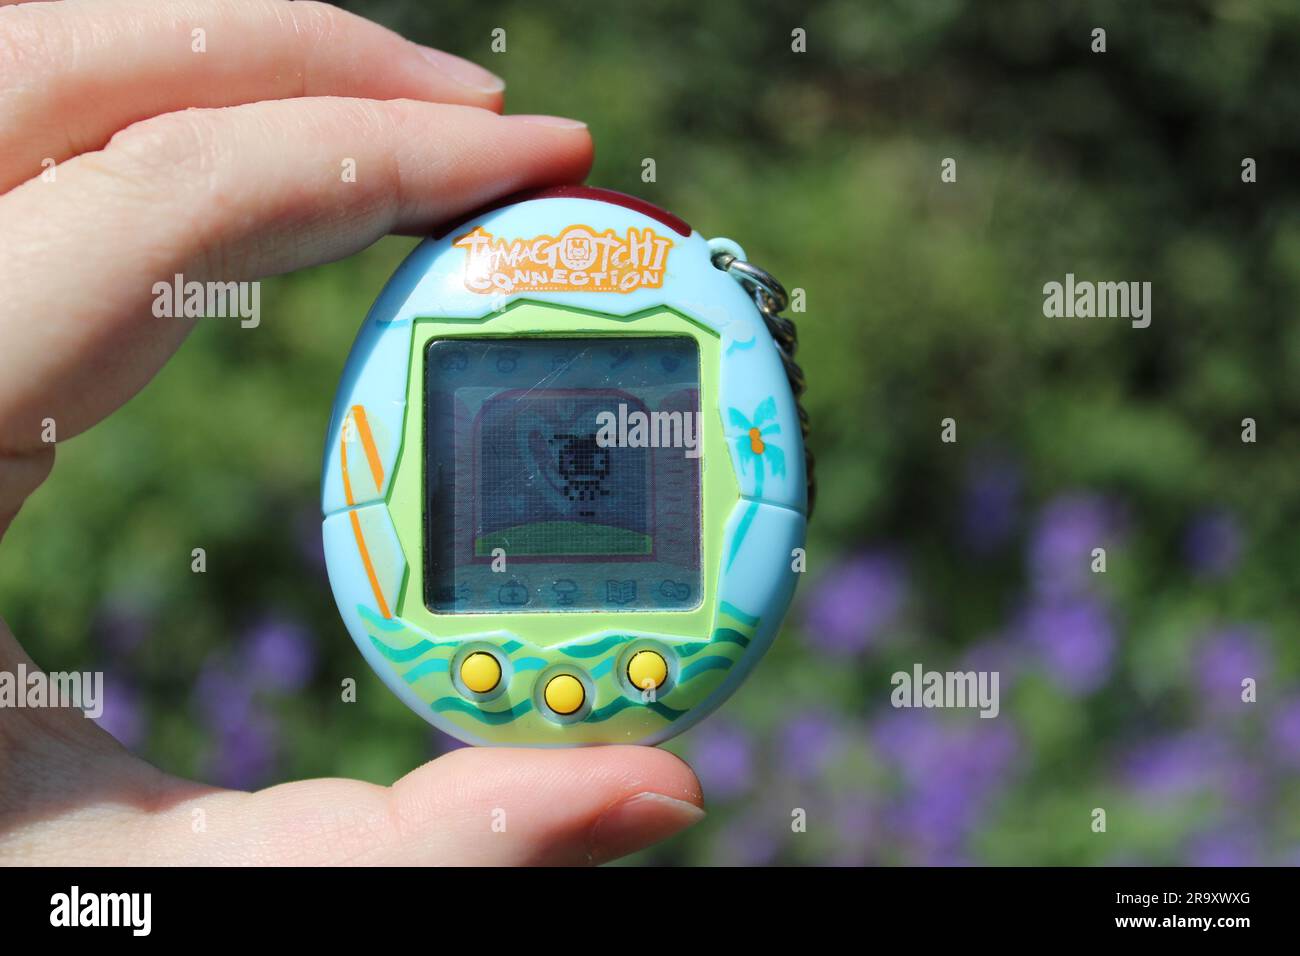 A tamagotchi device with a beach themed design is held in a garden setting. The character on the screen resembles an octopus. Stock Photo